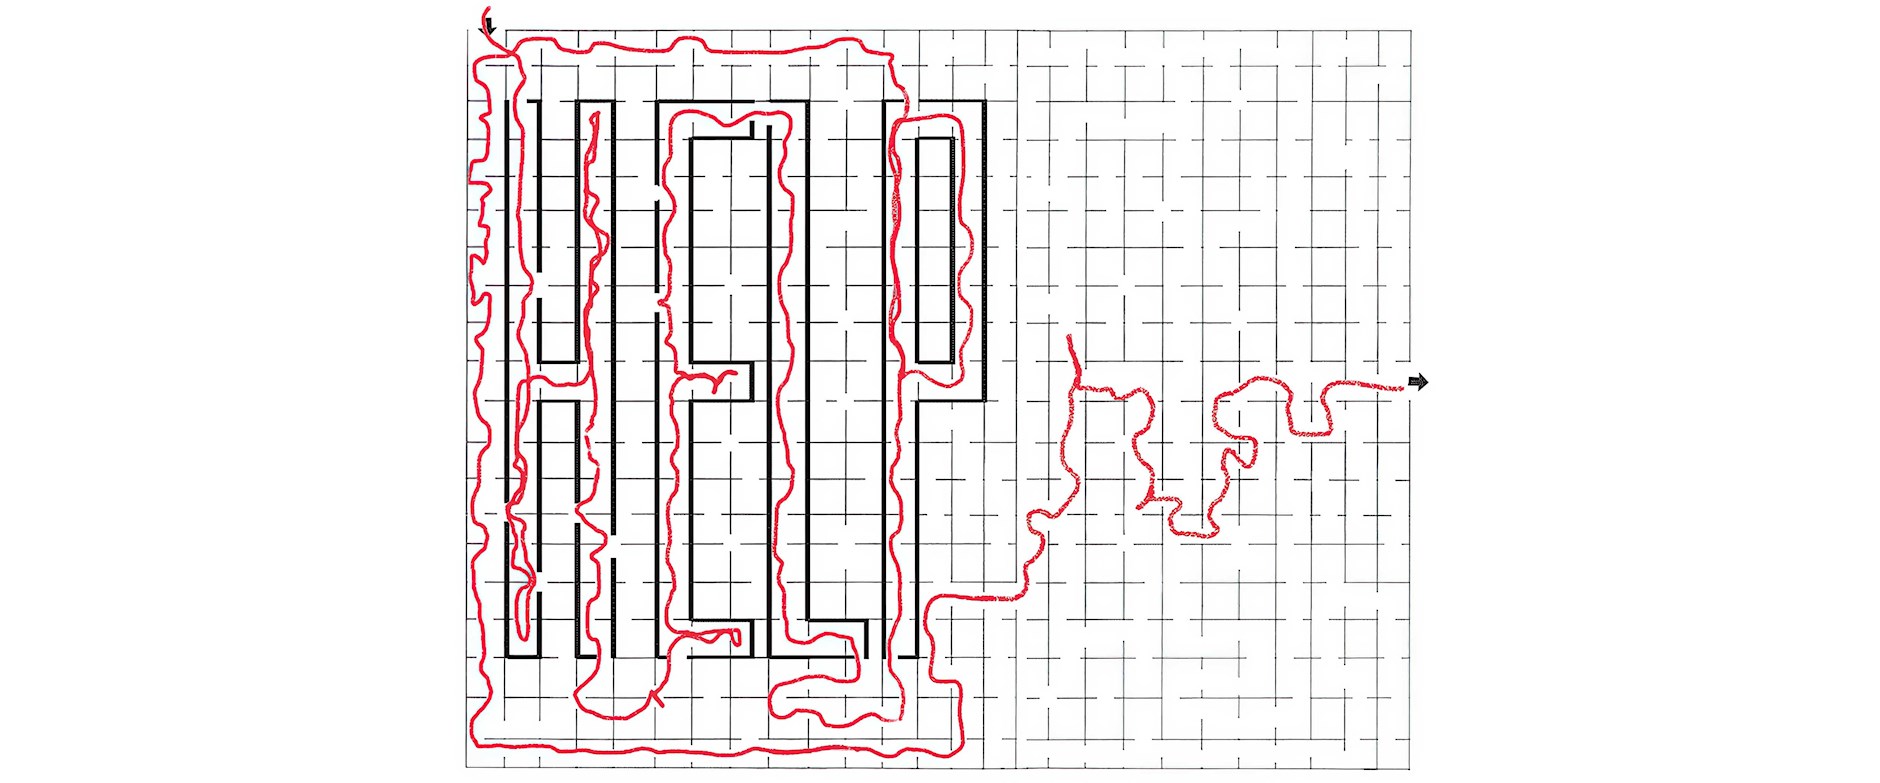 Maze with path that spells "HELP"